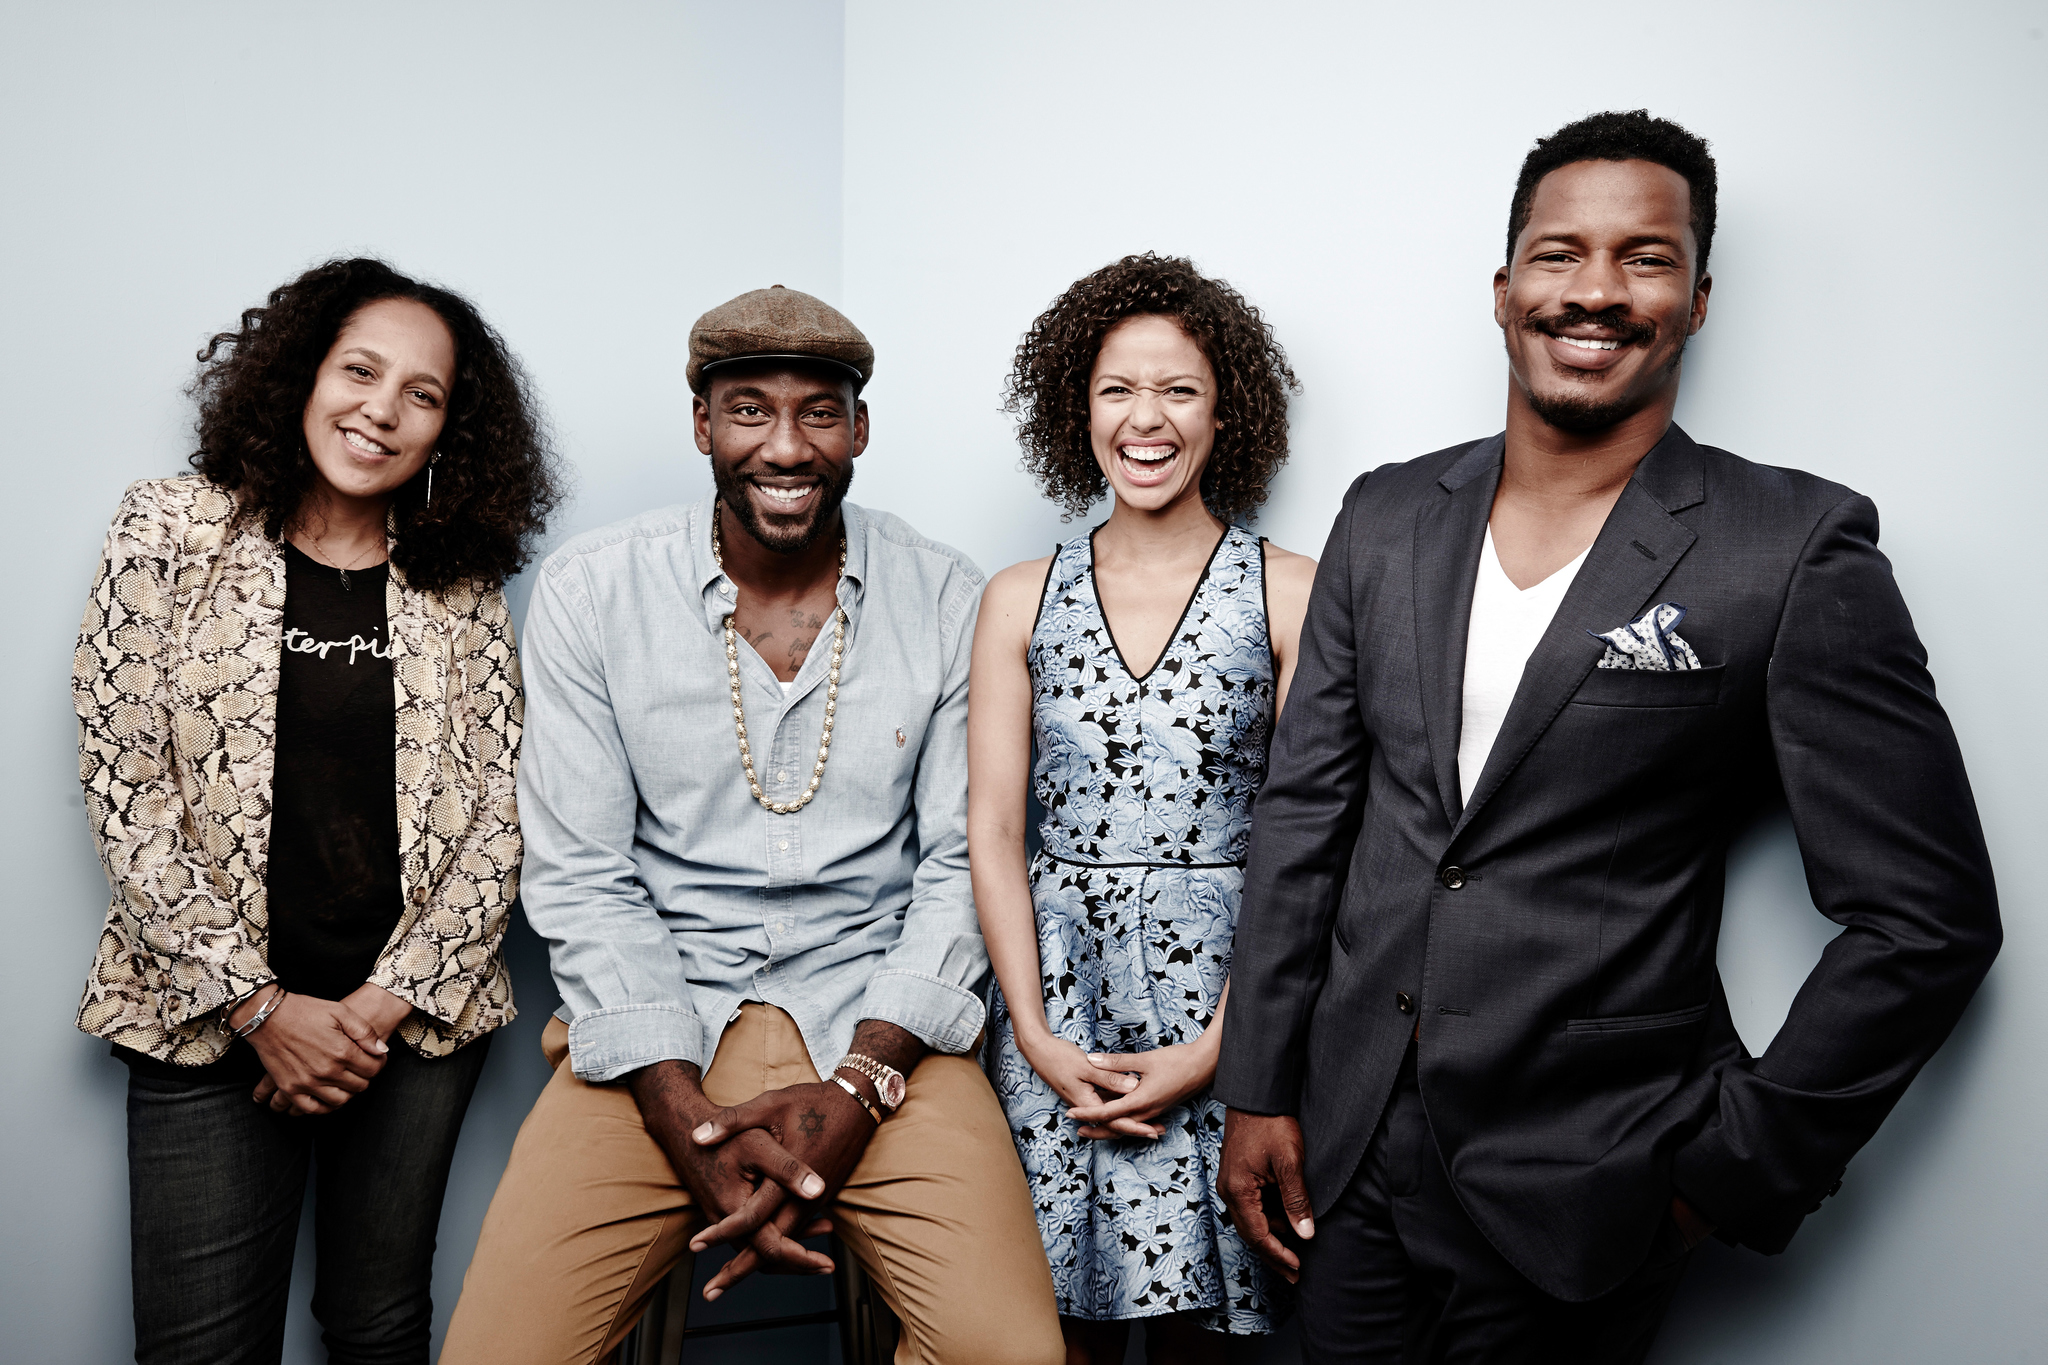 Gina Prince-Bythewood, Nate Parker, Gugu Mbatha-Raw and Amar'e Stoudemire at event of Beyond the Lights (2014)